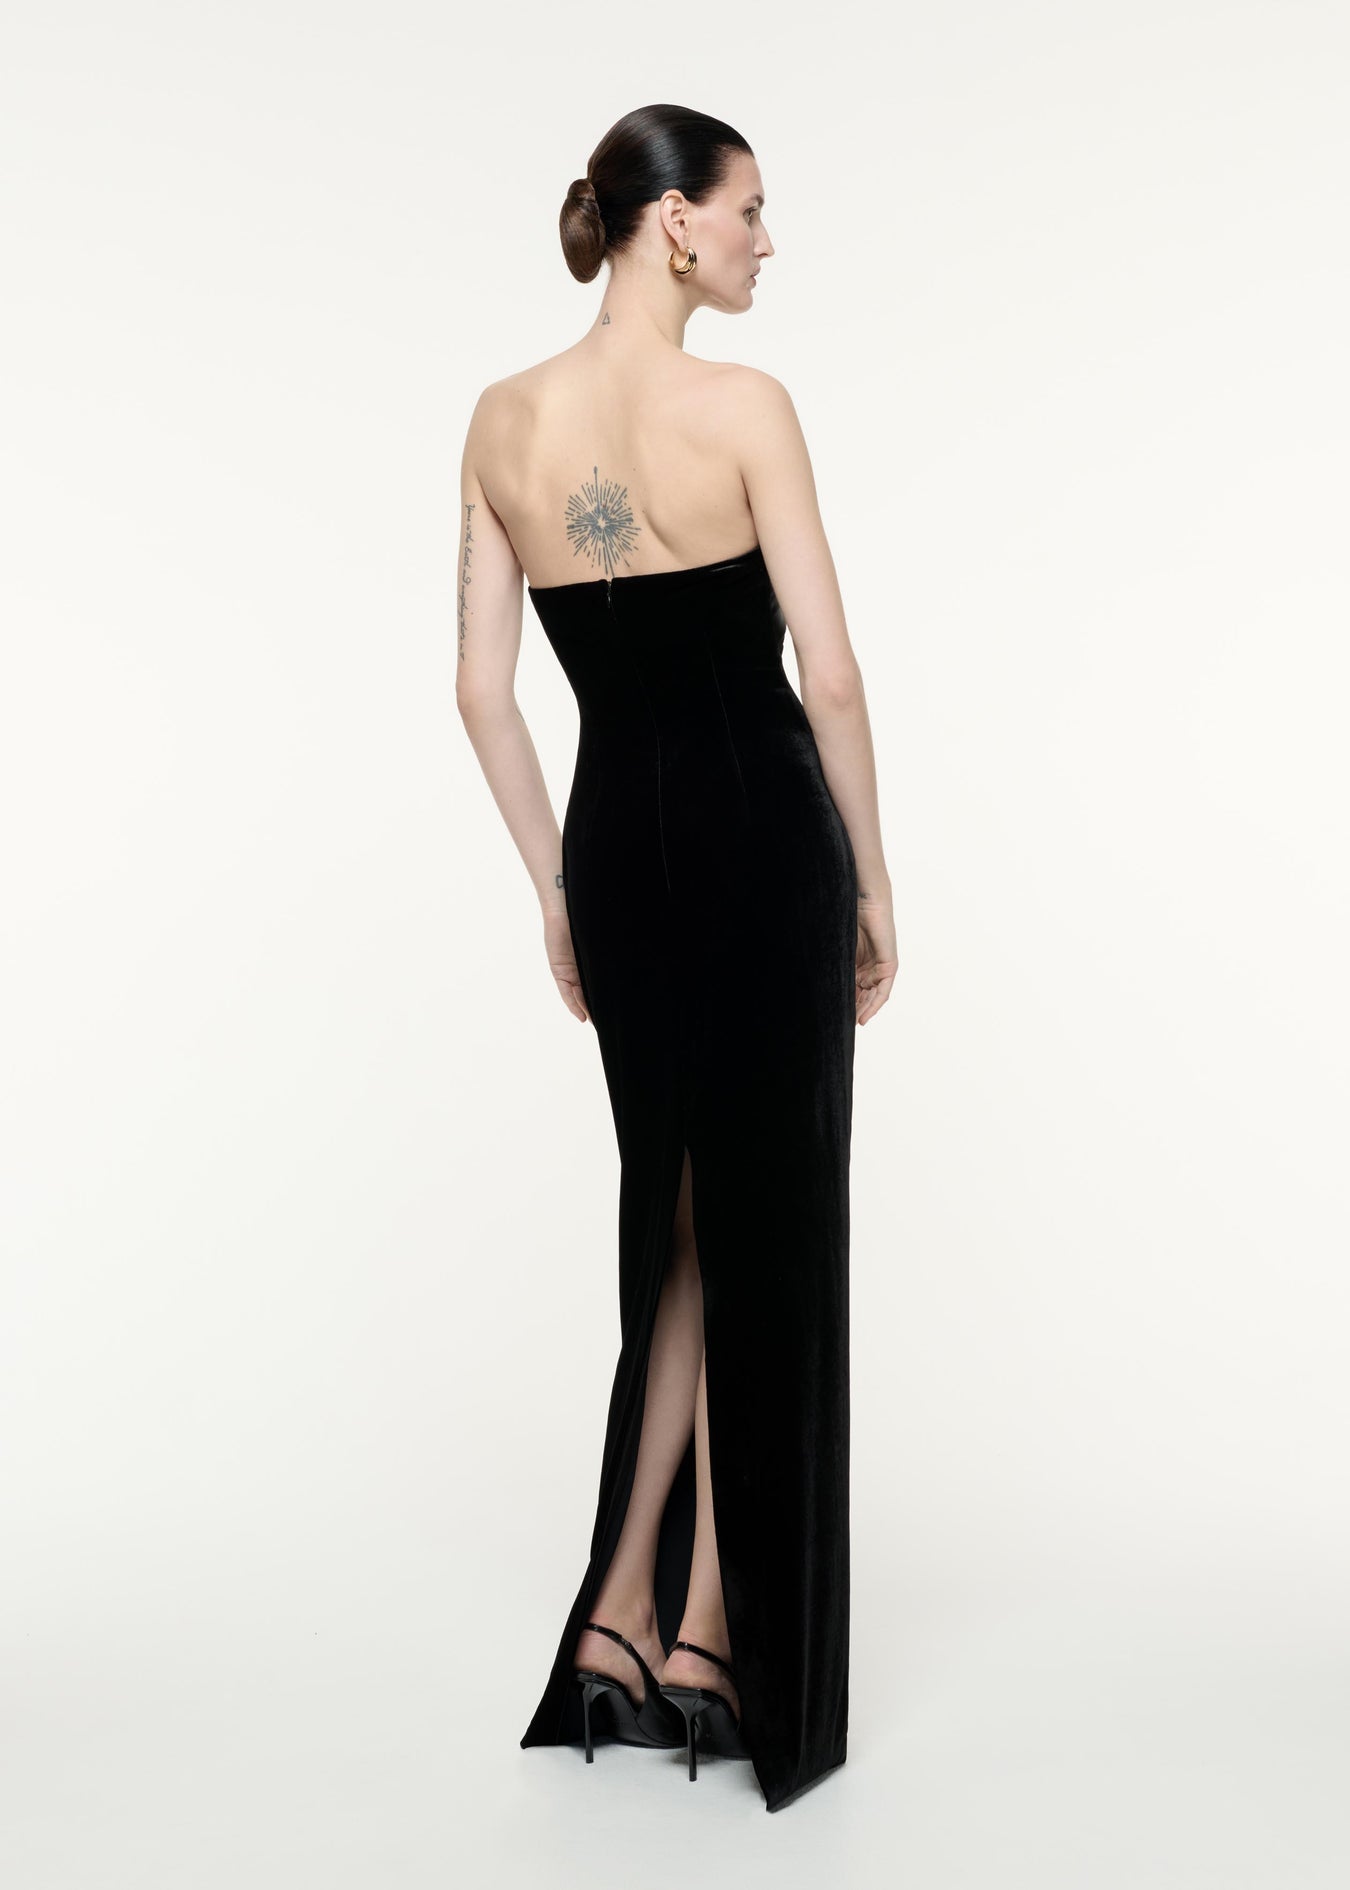 A back view image of a model wearing the Strapless Velvet Gown in Black